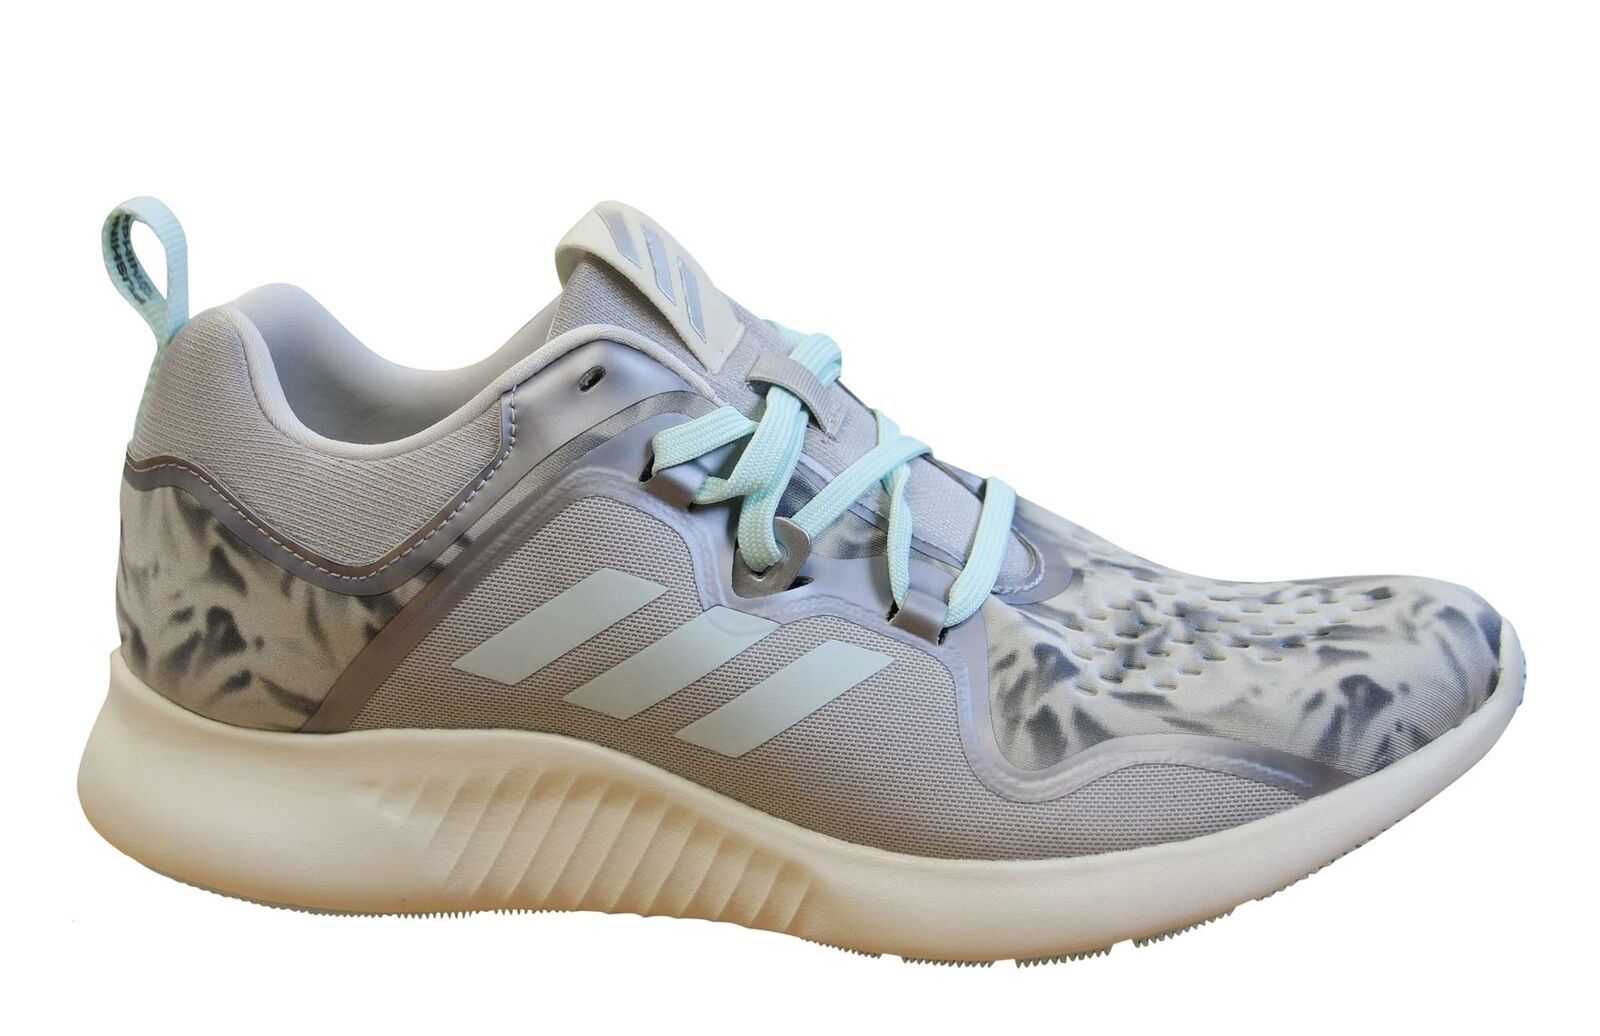 Adidas Edgebounce Running Trainers Lace Up Shoes - Womens